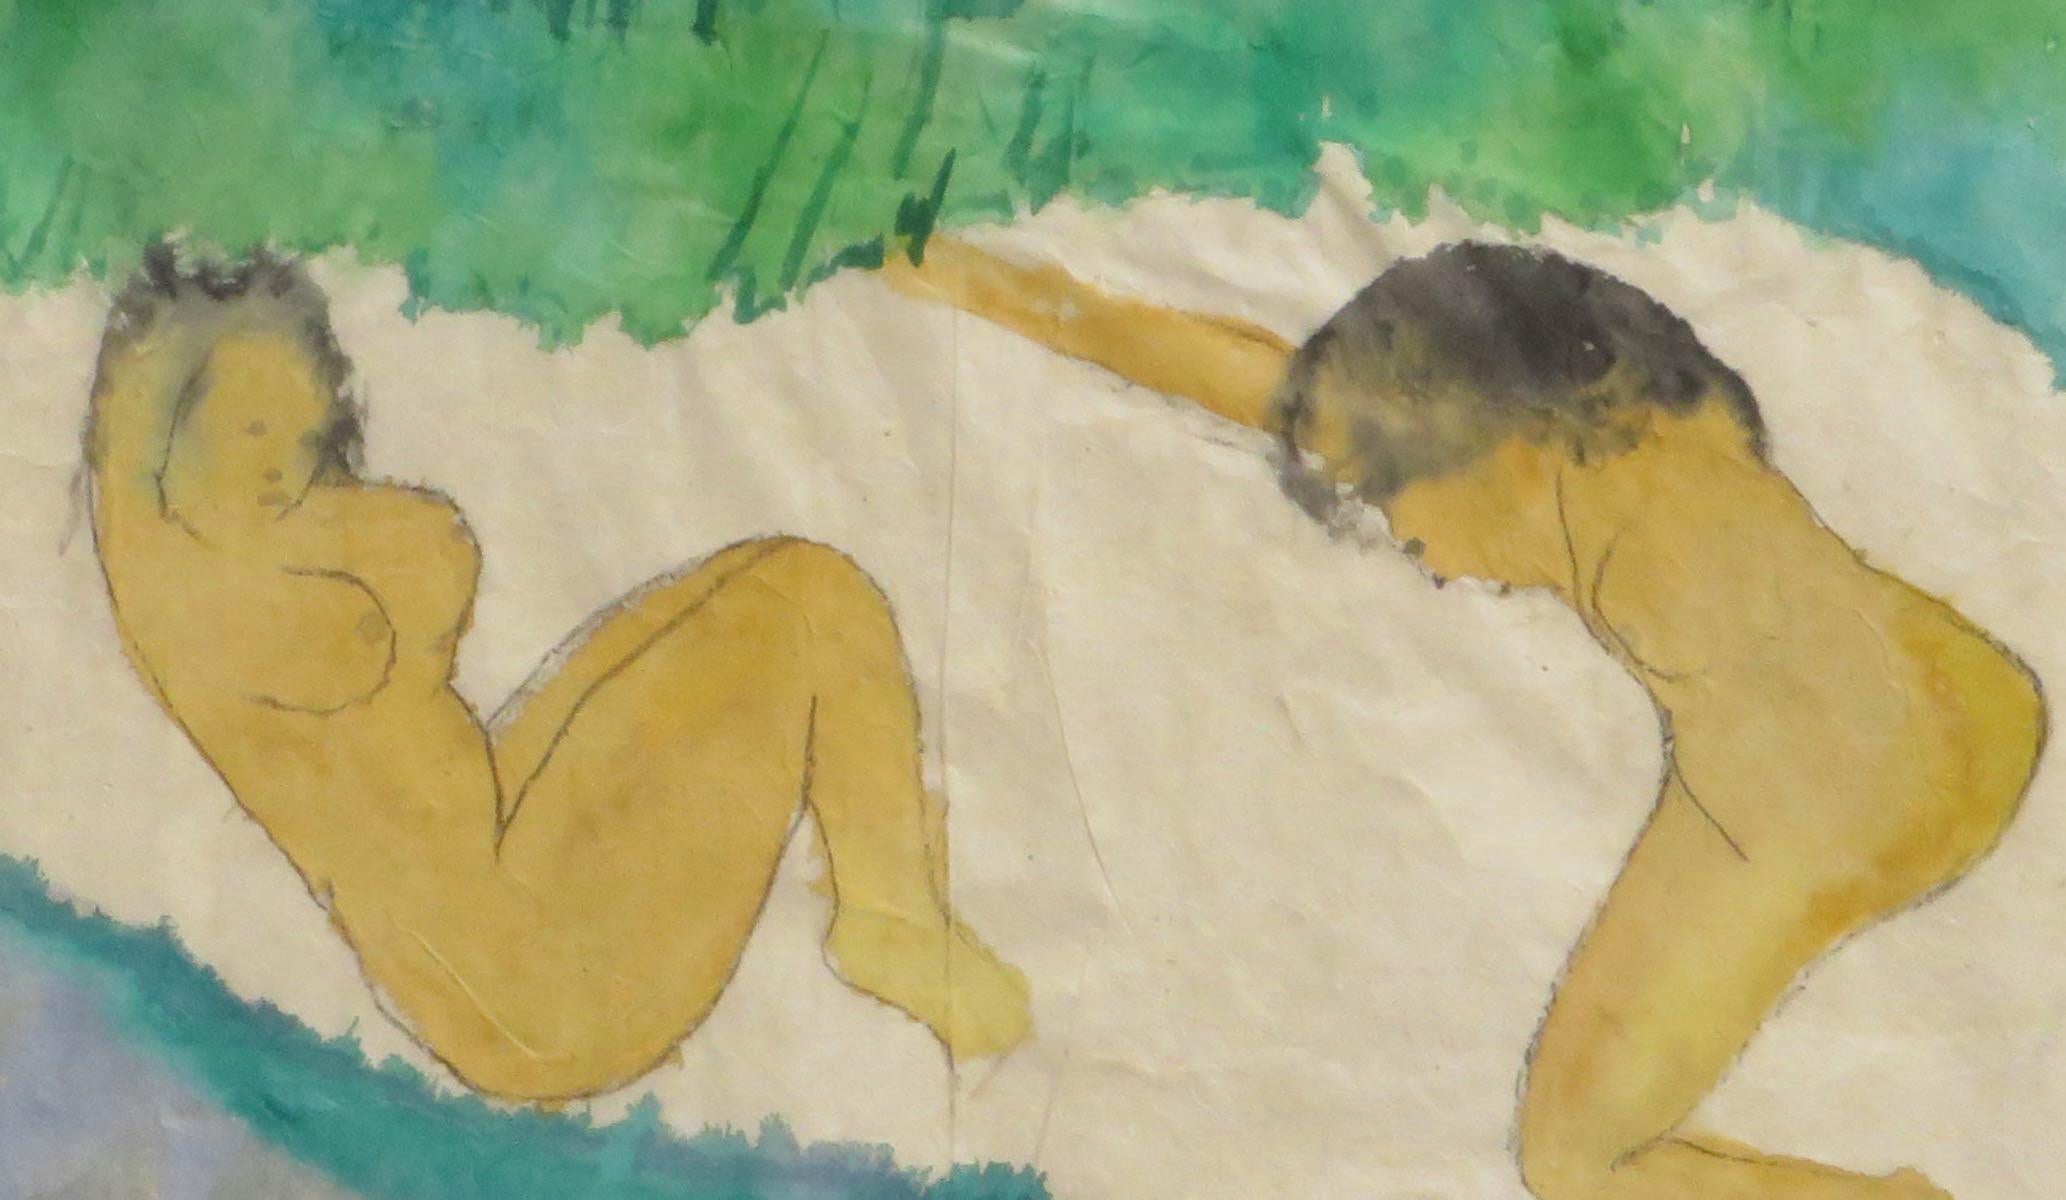 Women Bathing, Nude, Watercolor on Rice Paper, Green, Grey, Browncolor